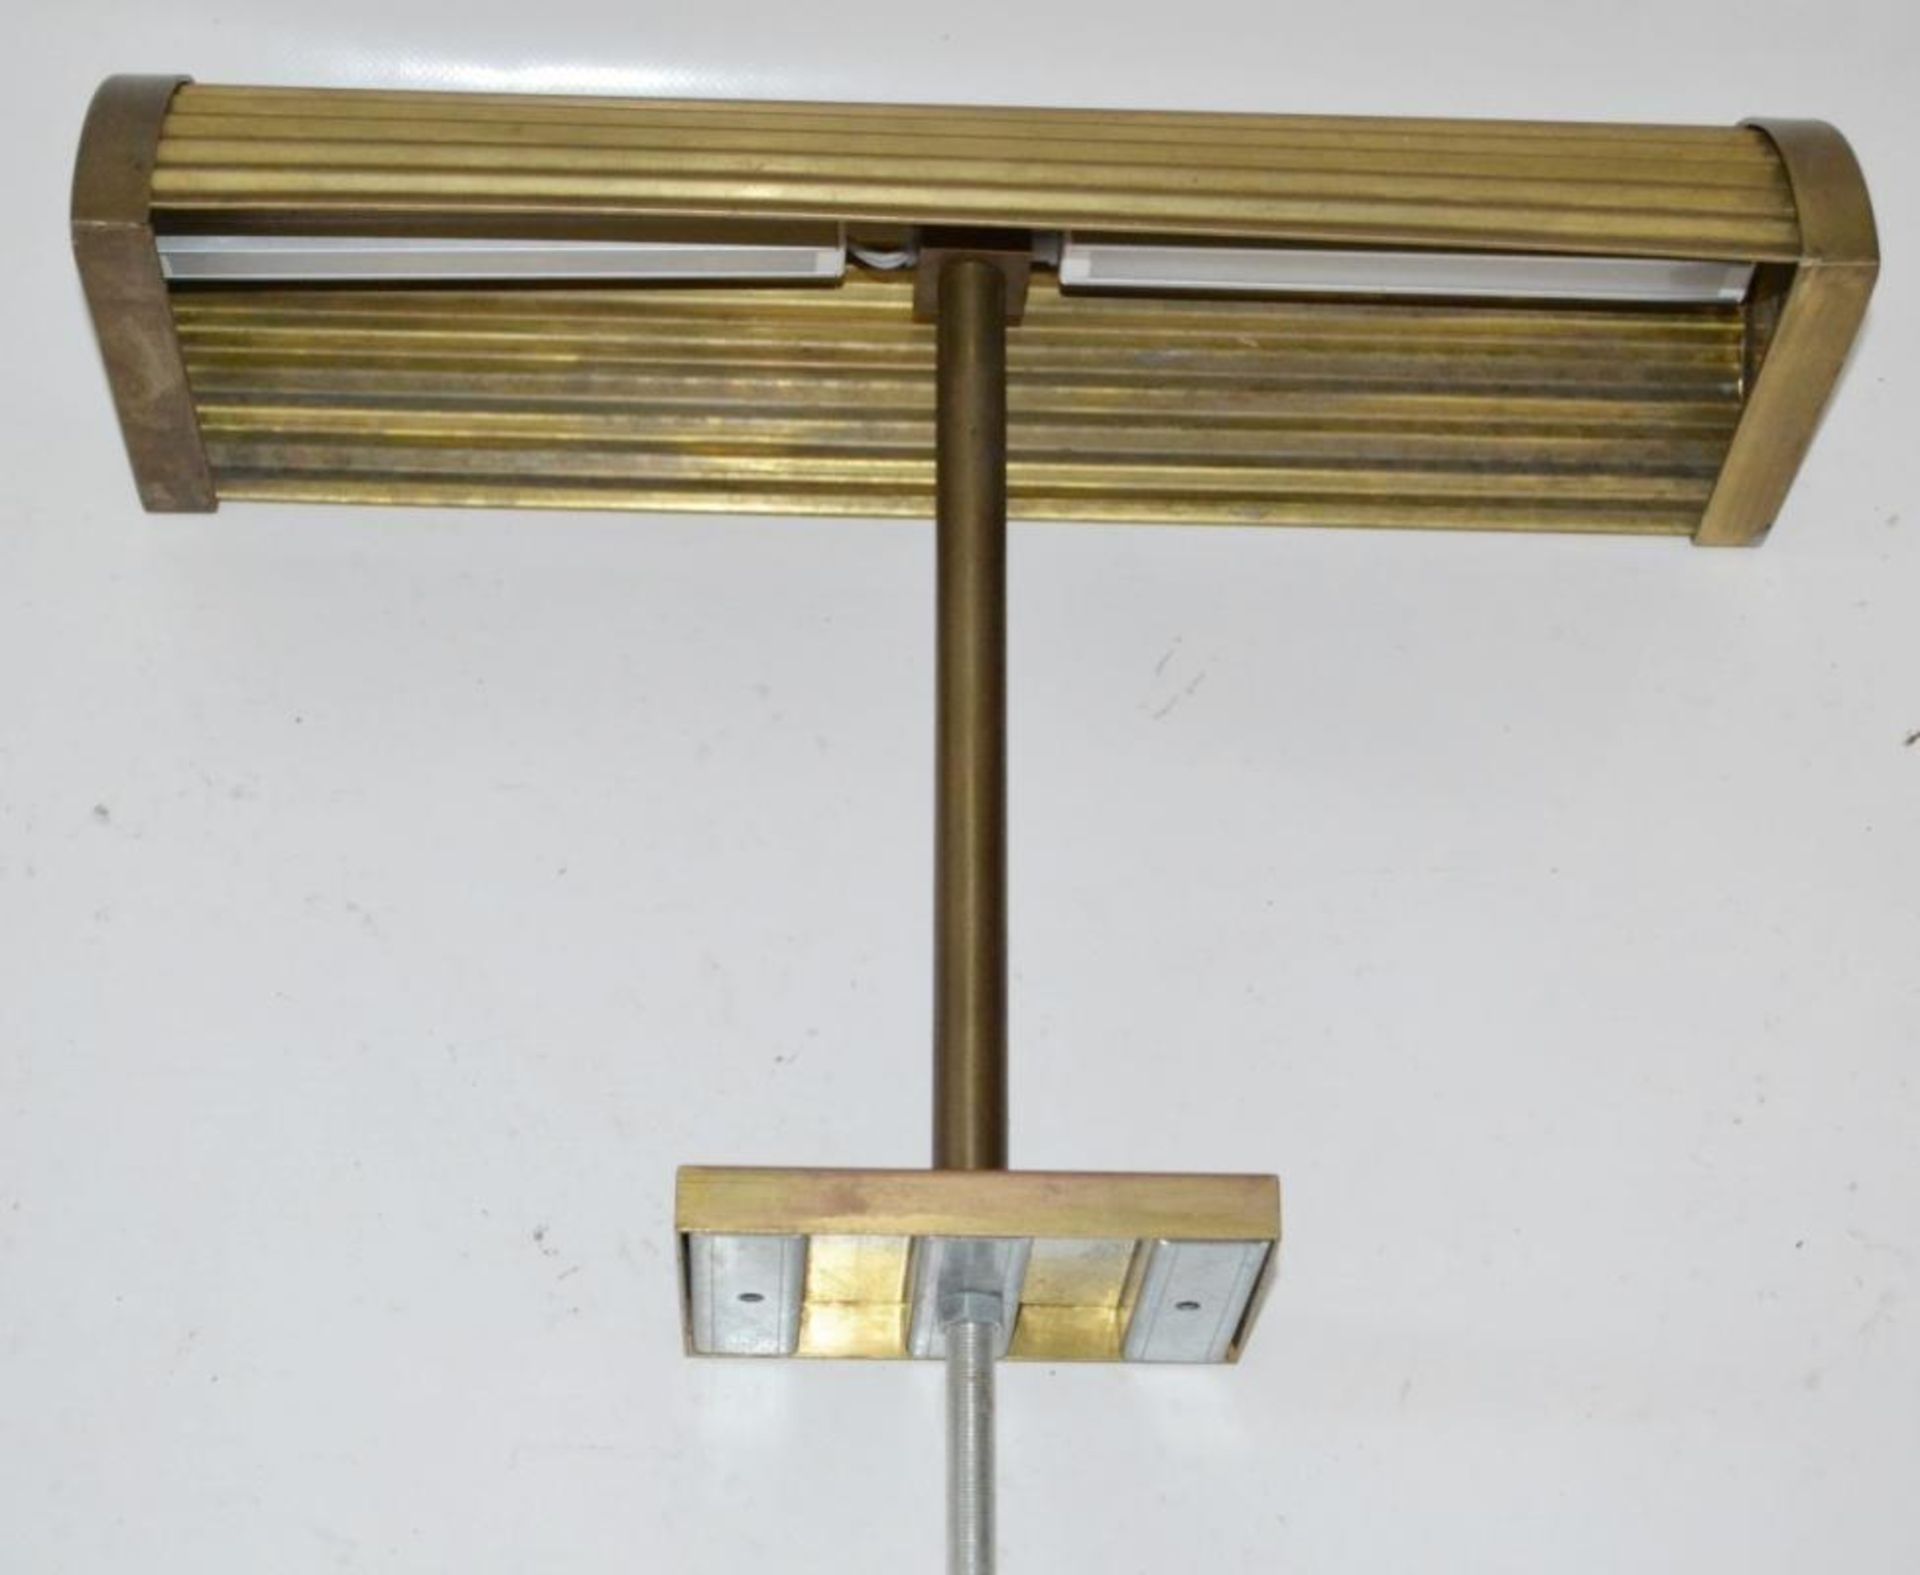 4 x Art Deco Style Table Mounted Lights In Brass - Recently Removed From A City Centre Brasserie In - Image 2 of 8